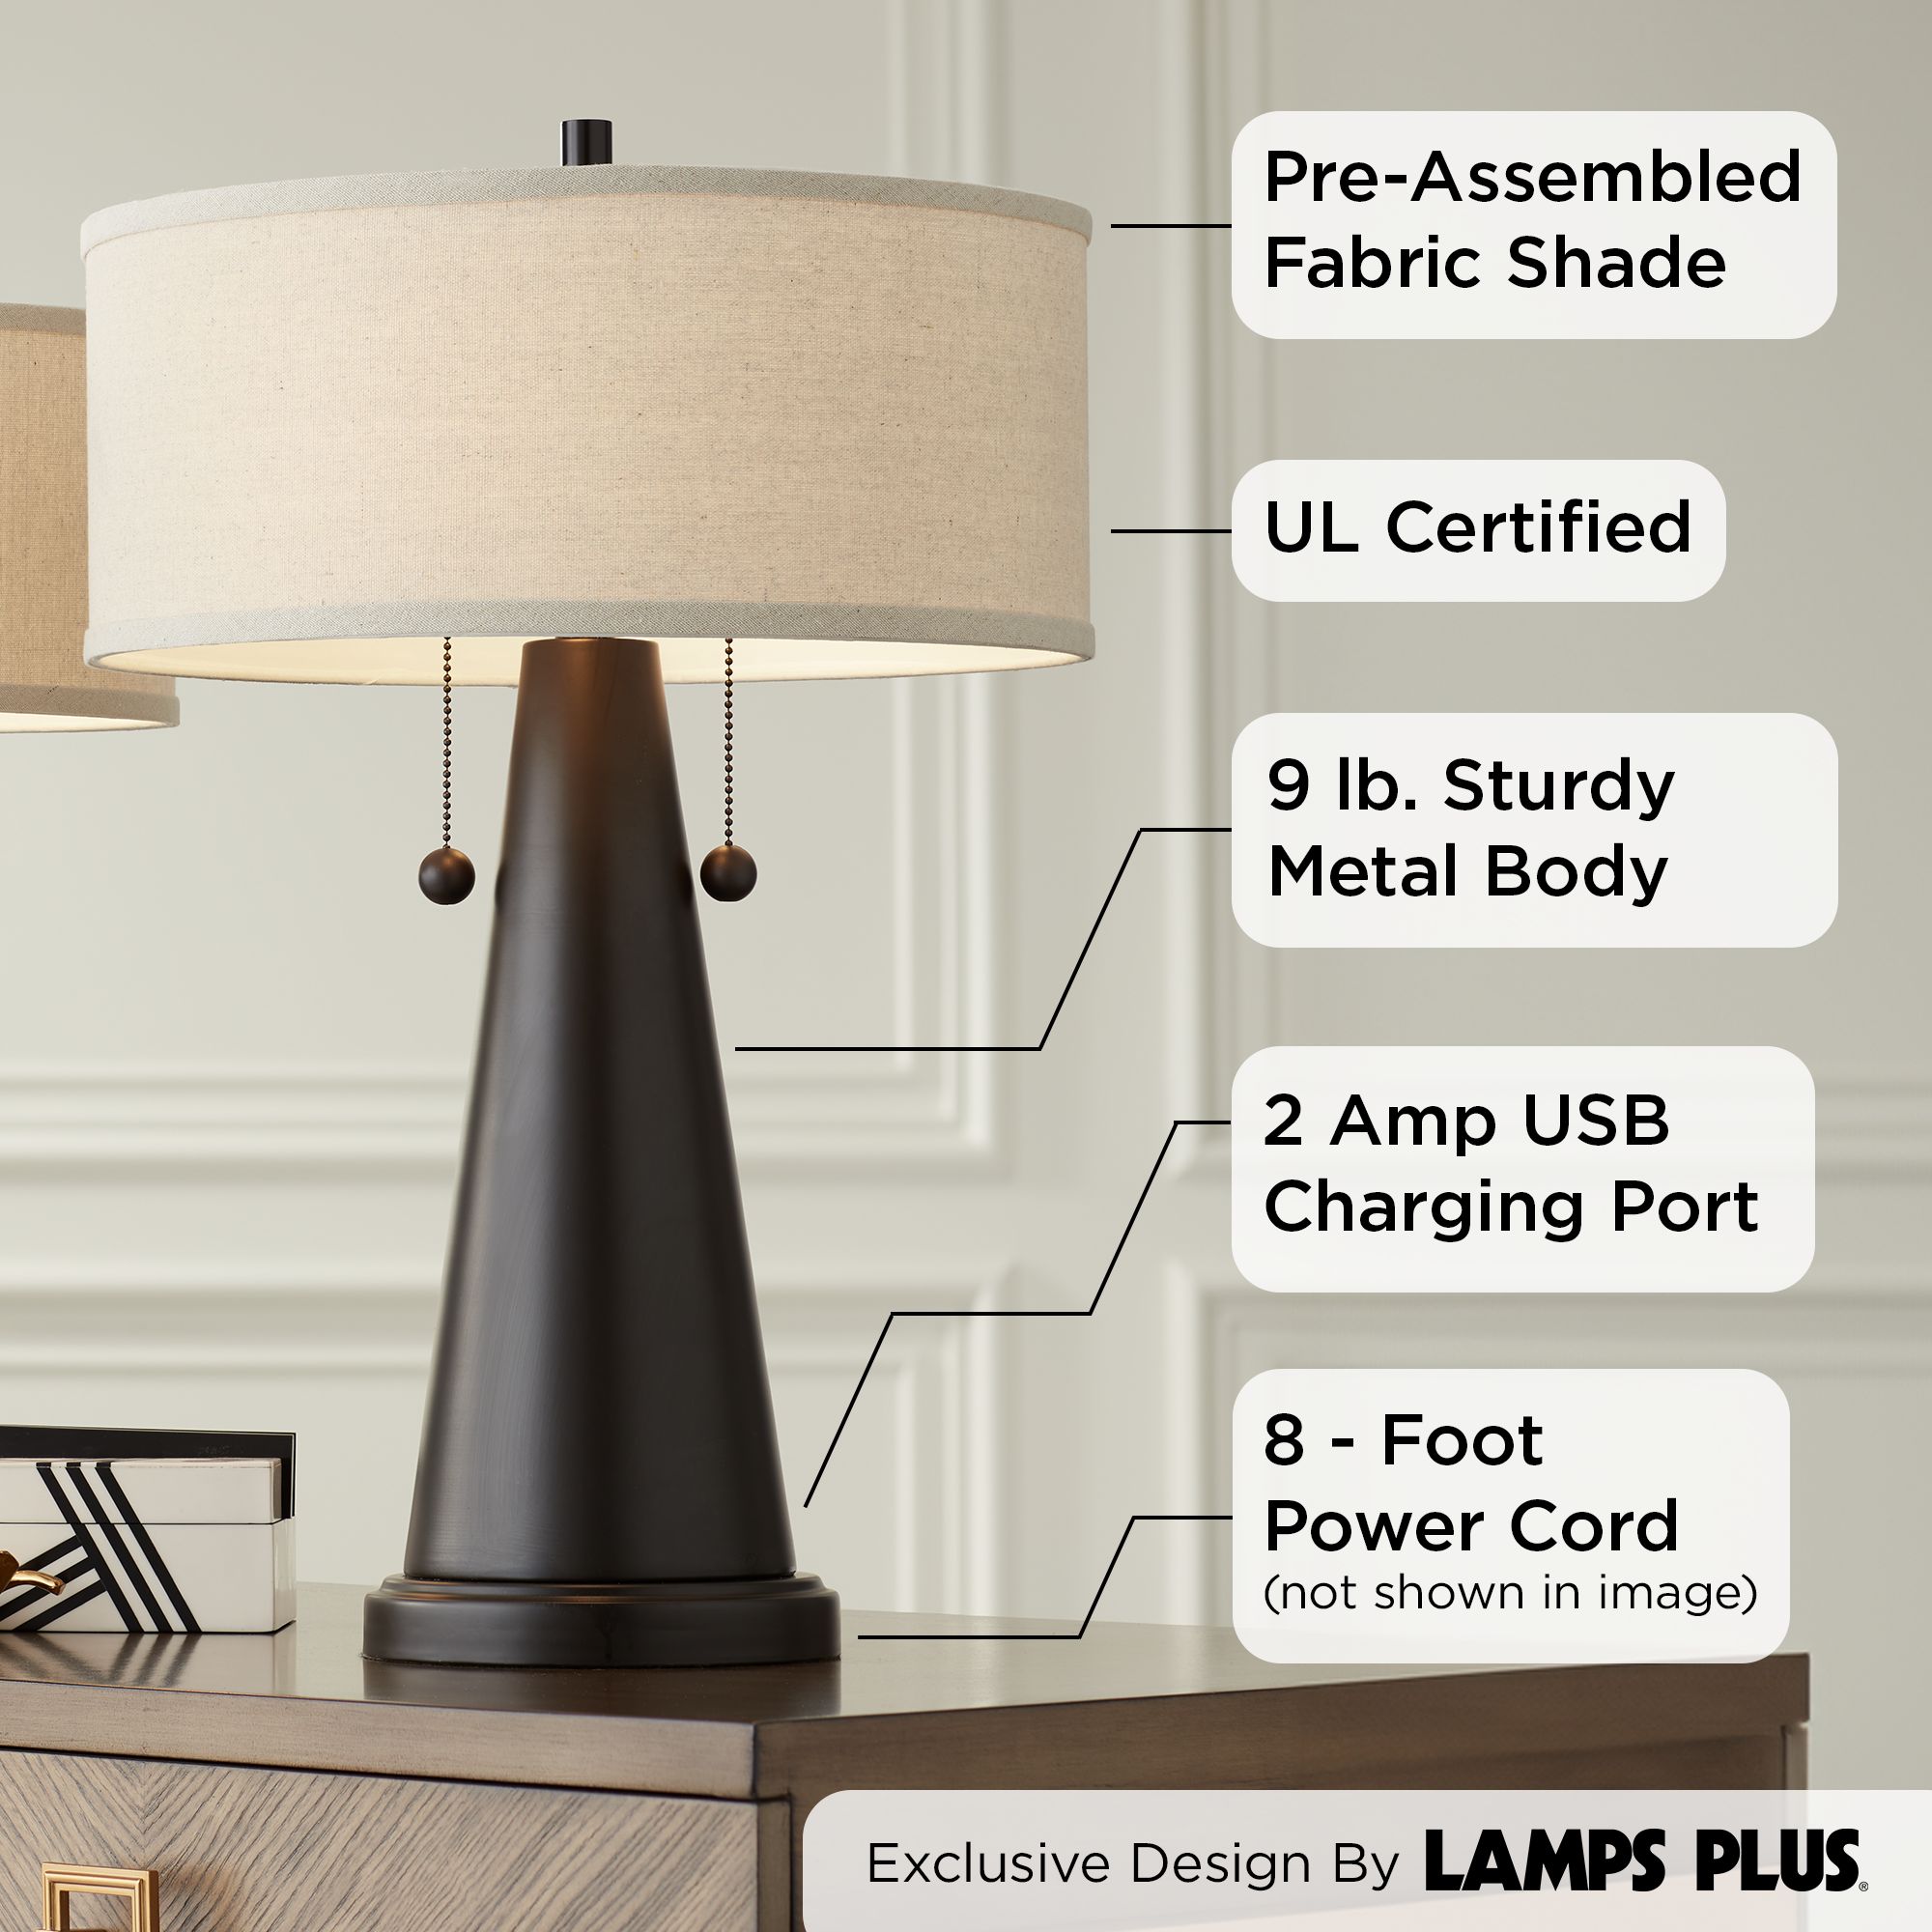 Franklin Iron Works Craig Rustic Farmhouse Accent Table Lamps 23" High Set of 2 Bronze with USB Charging Port Natural Drum Shade for Bedroom Desk - image 3 of 8